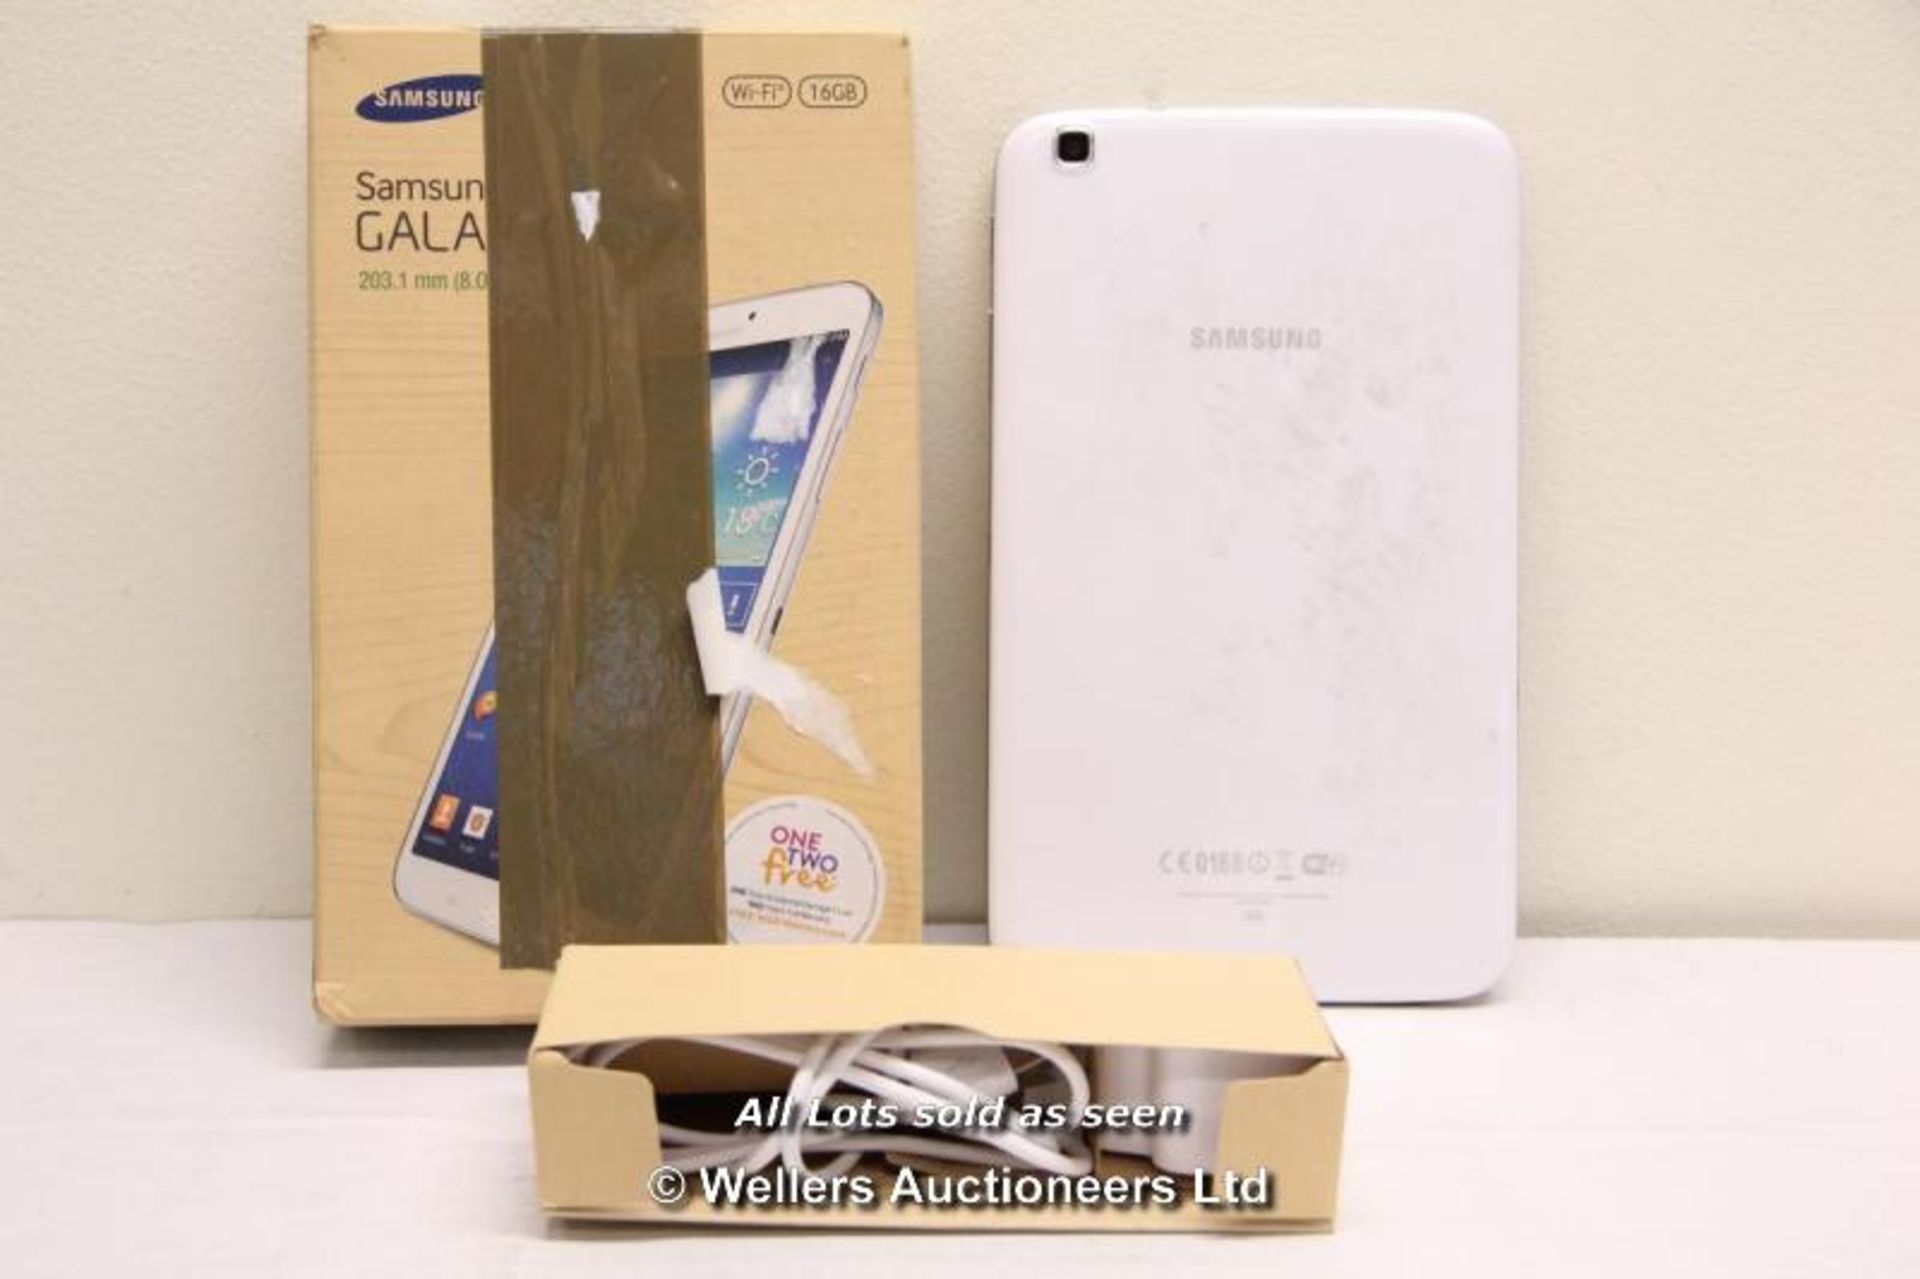 SAMSUNG GALAXY TAB 3 SM-T310 16GB WI-FI  8" - WHITE (36064472) / INCLUDING CHARGER AND USB CABLE / - Image 2 of 2